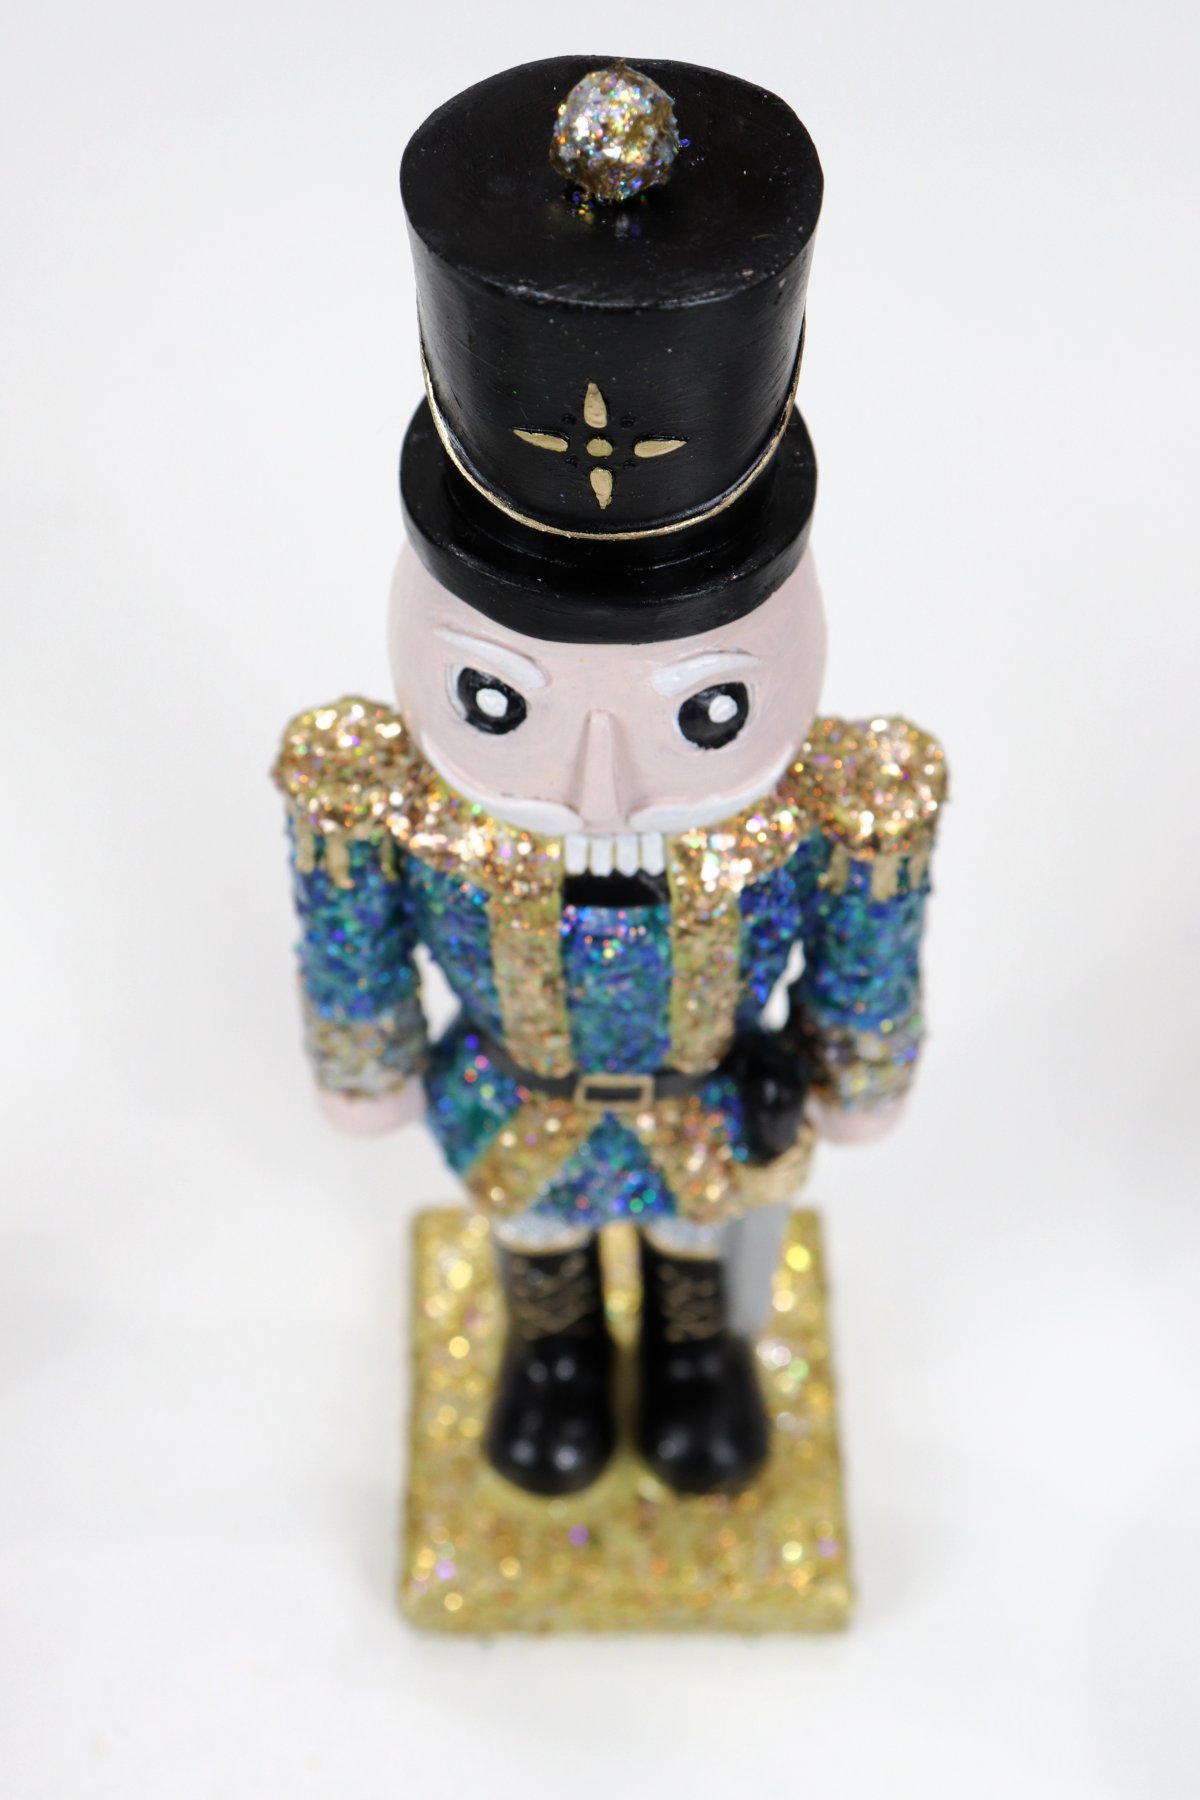 Image contains an overhead view of a hand-painted nutcracker figurine with a blue and gold jacket, gold stand, and black hat.